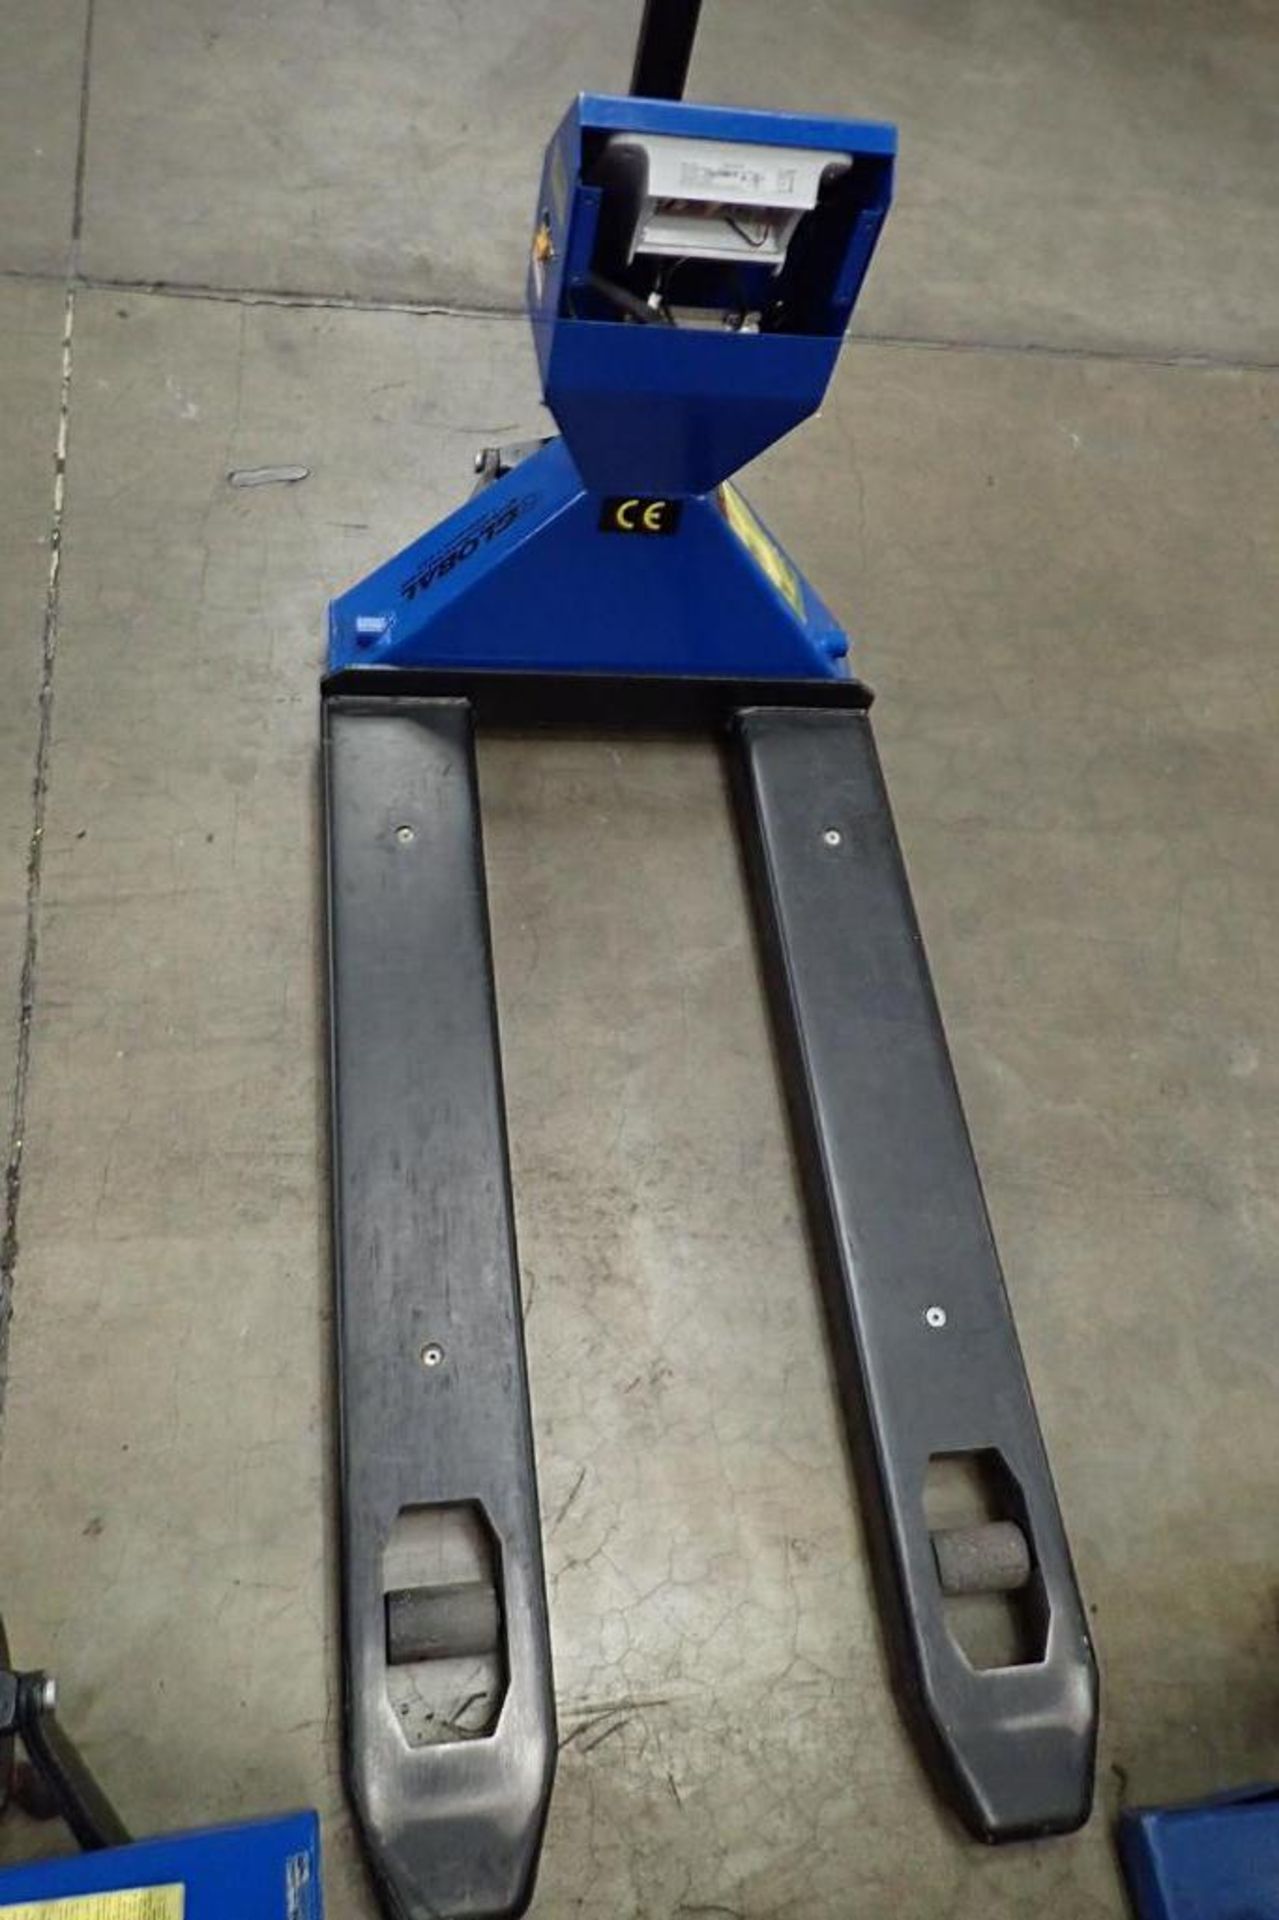 Global Industrial hand pallet jack, SN 382317, with Mettler Toledo on board scale, 5000 lb capacity, - Image 3 of 7